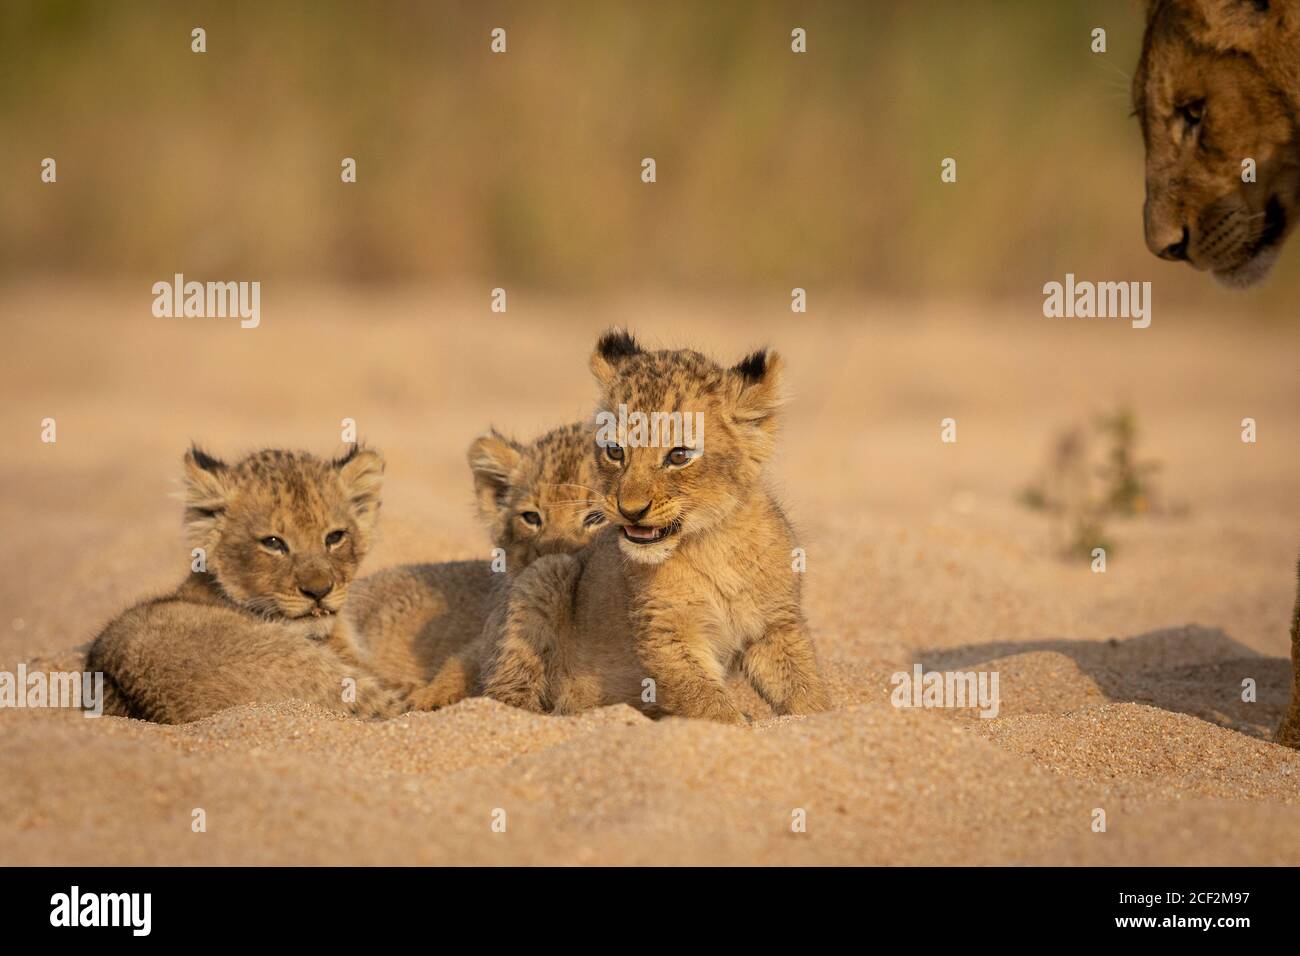 Tiny baby lions resting in sand in Kruger Park in South Africa Stock Photo